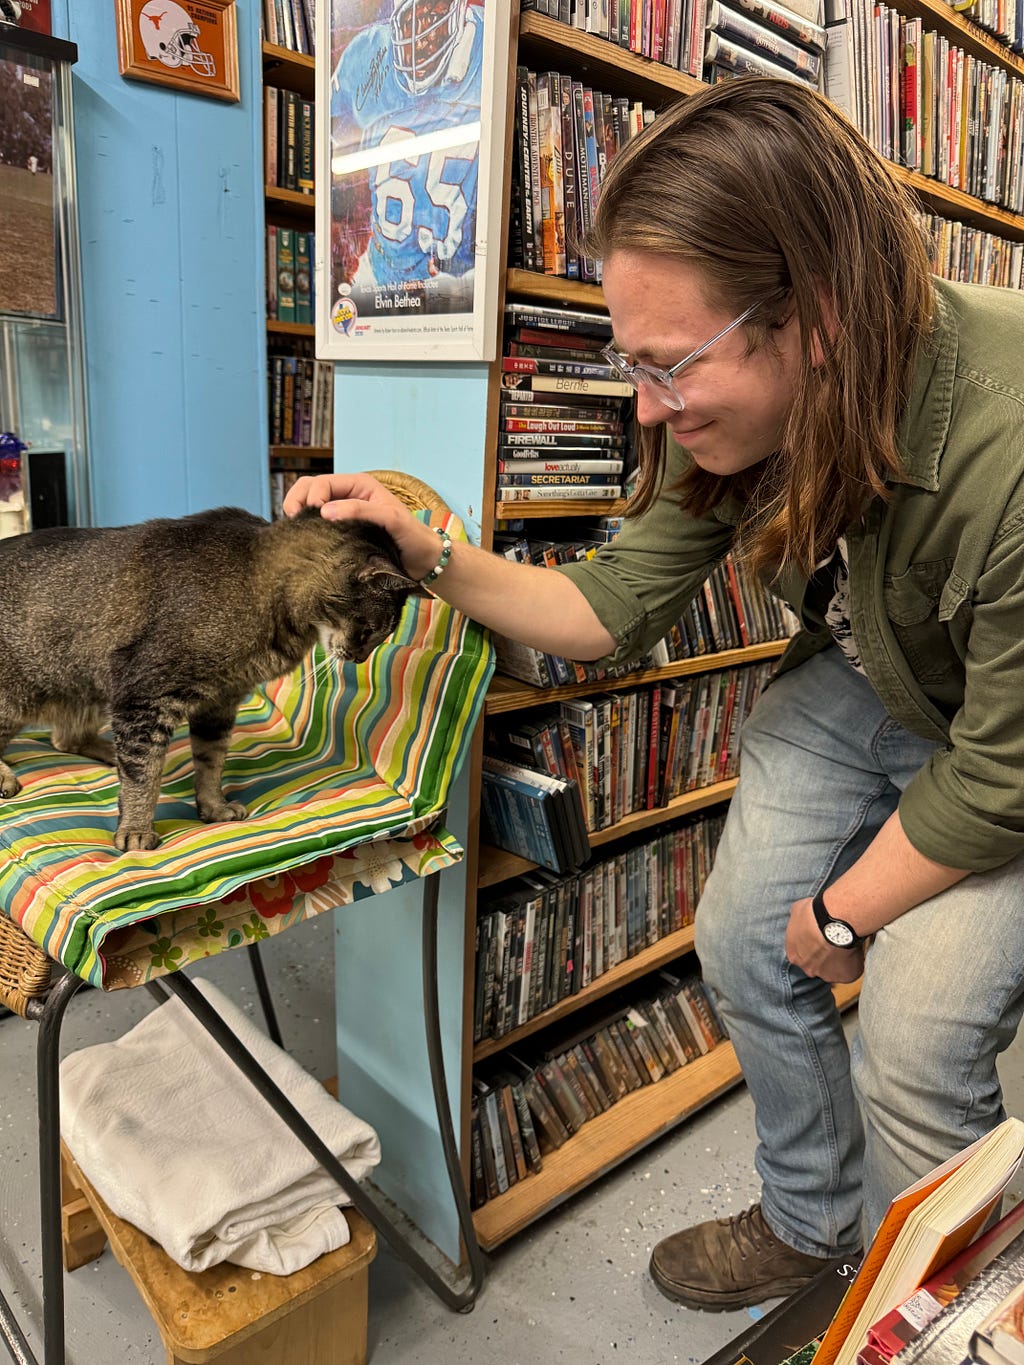 A person pets a cat’s head in front of a bookshelf at The Book Cellar in Temple, Texas.